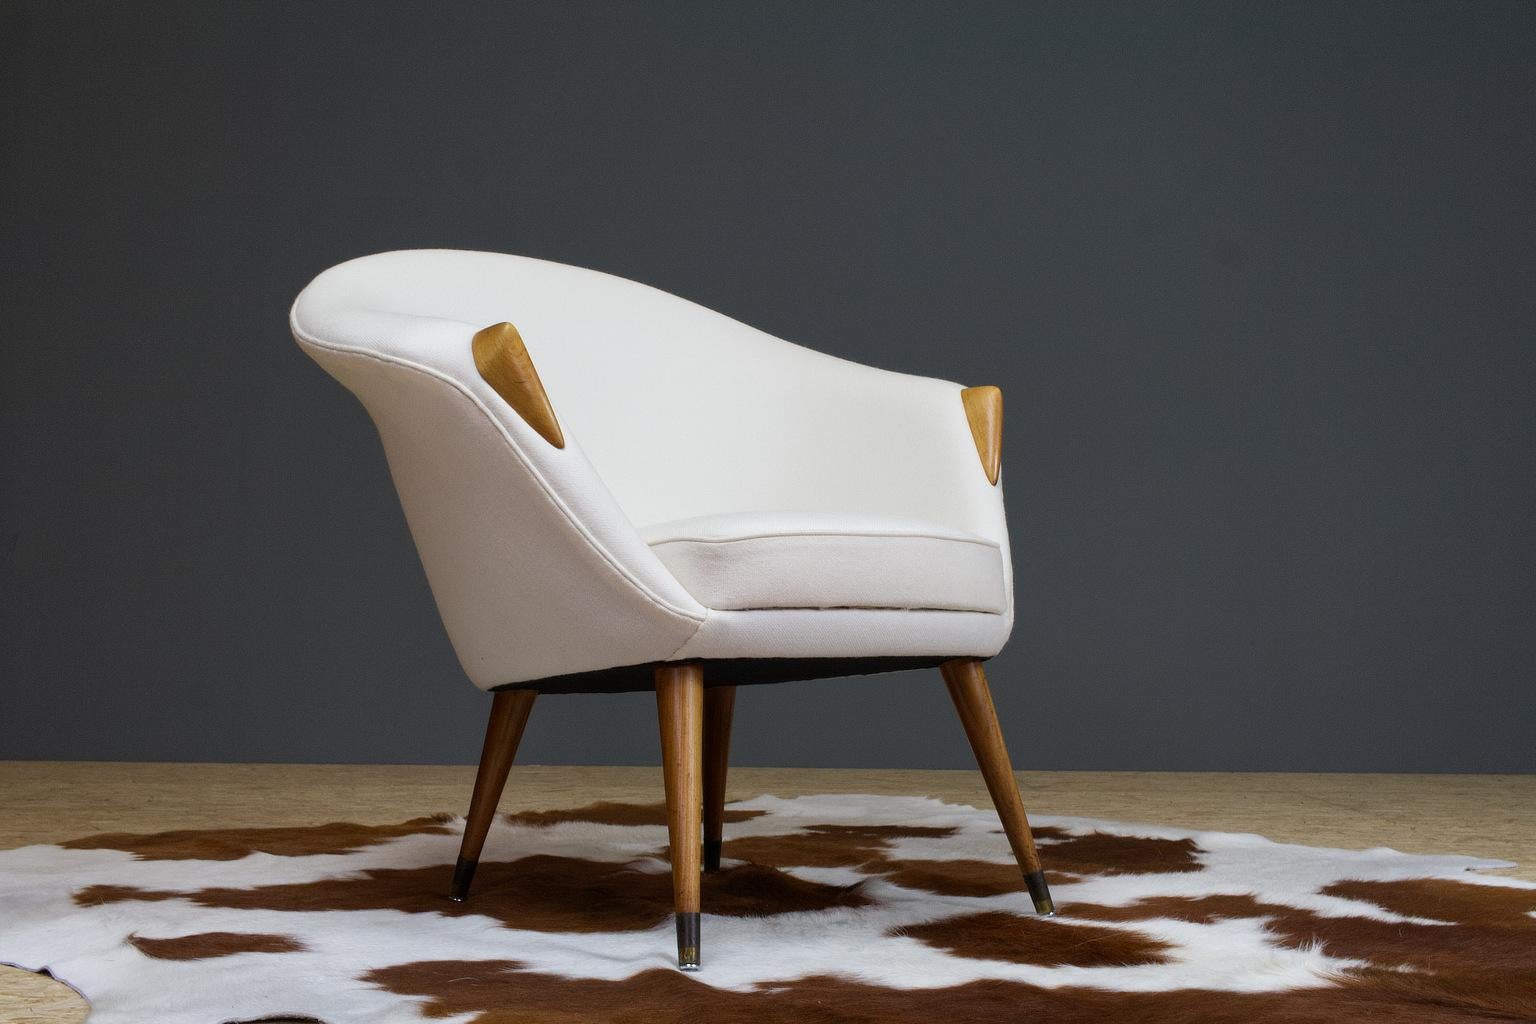 Light and elegantly shaped Danish modern lounge chair in manner of the nursing chair by Nanna Ditzel, 1950s. We have an identical set in stock, yet can be sold separate. These seats originate from Denmark, designer unknown. The curved shell is